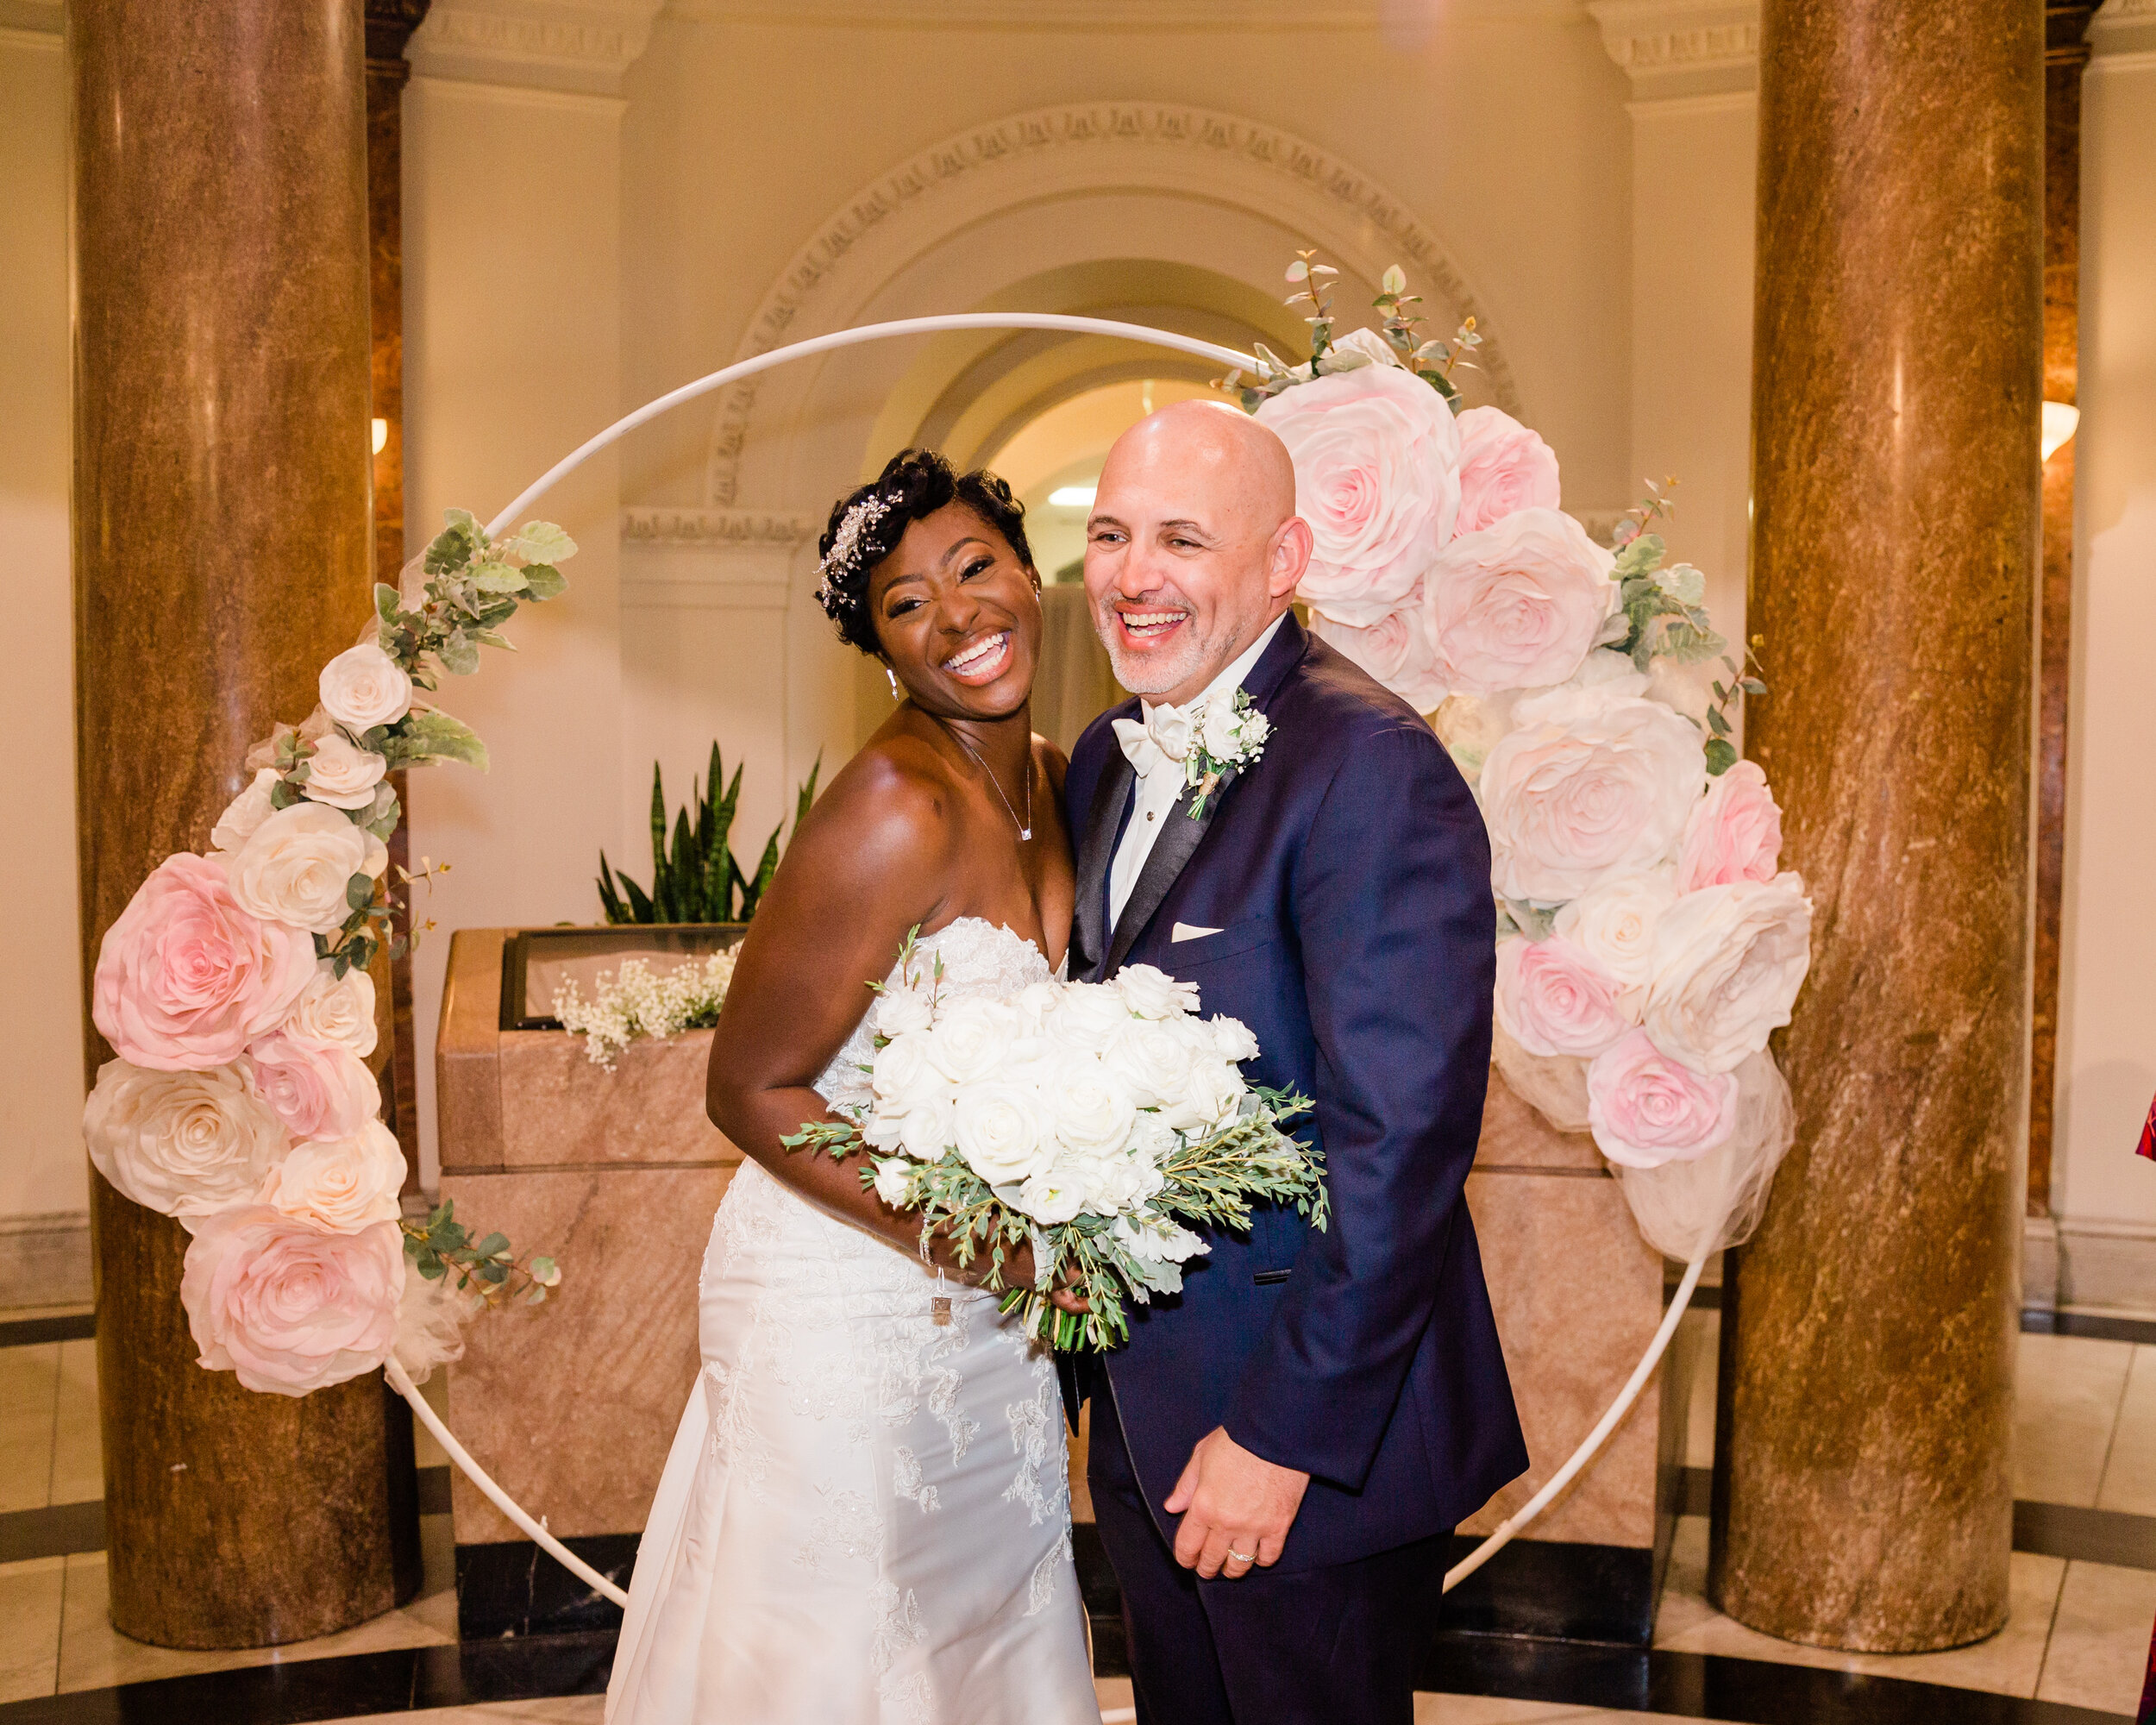 get married in baltimore city hall shot by megapixels media biracial couple wedding photographers maryland-80.jpg